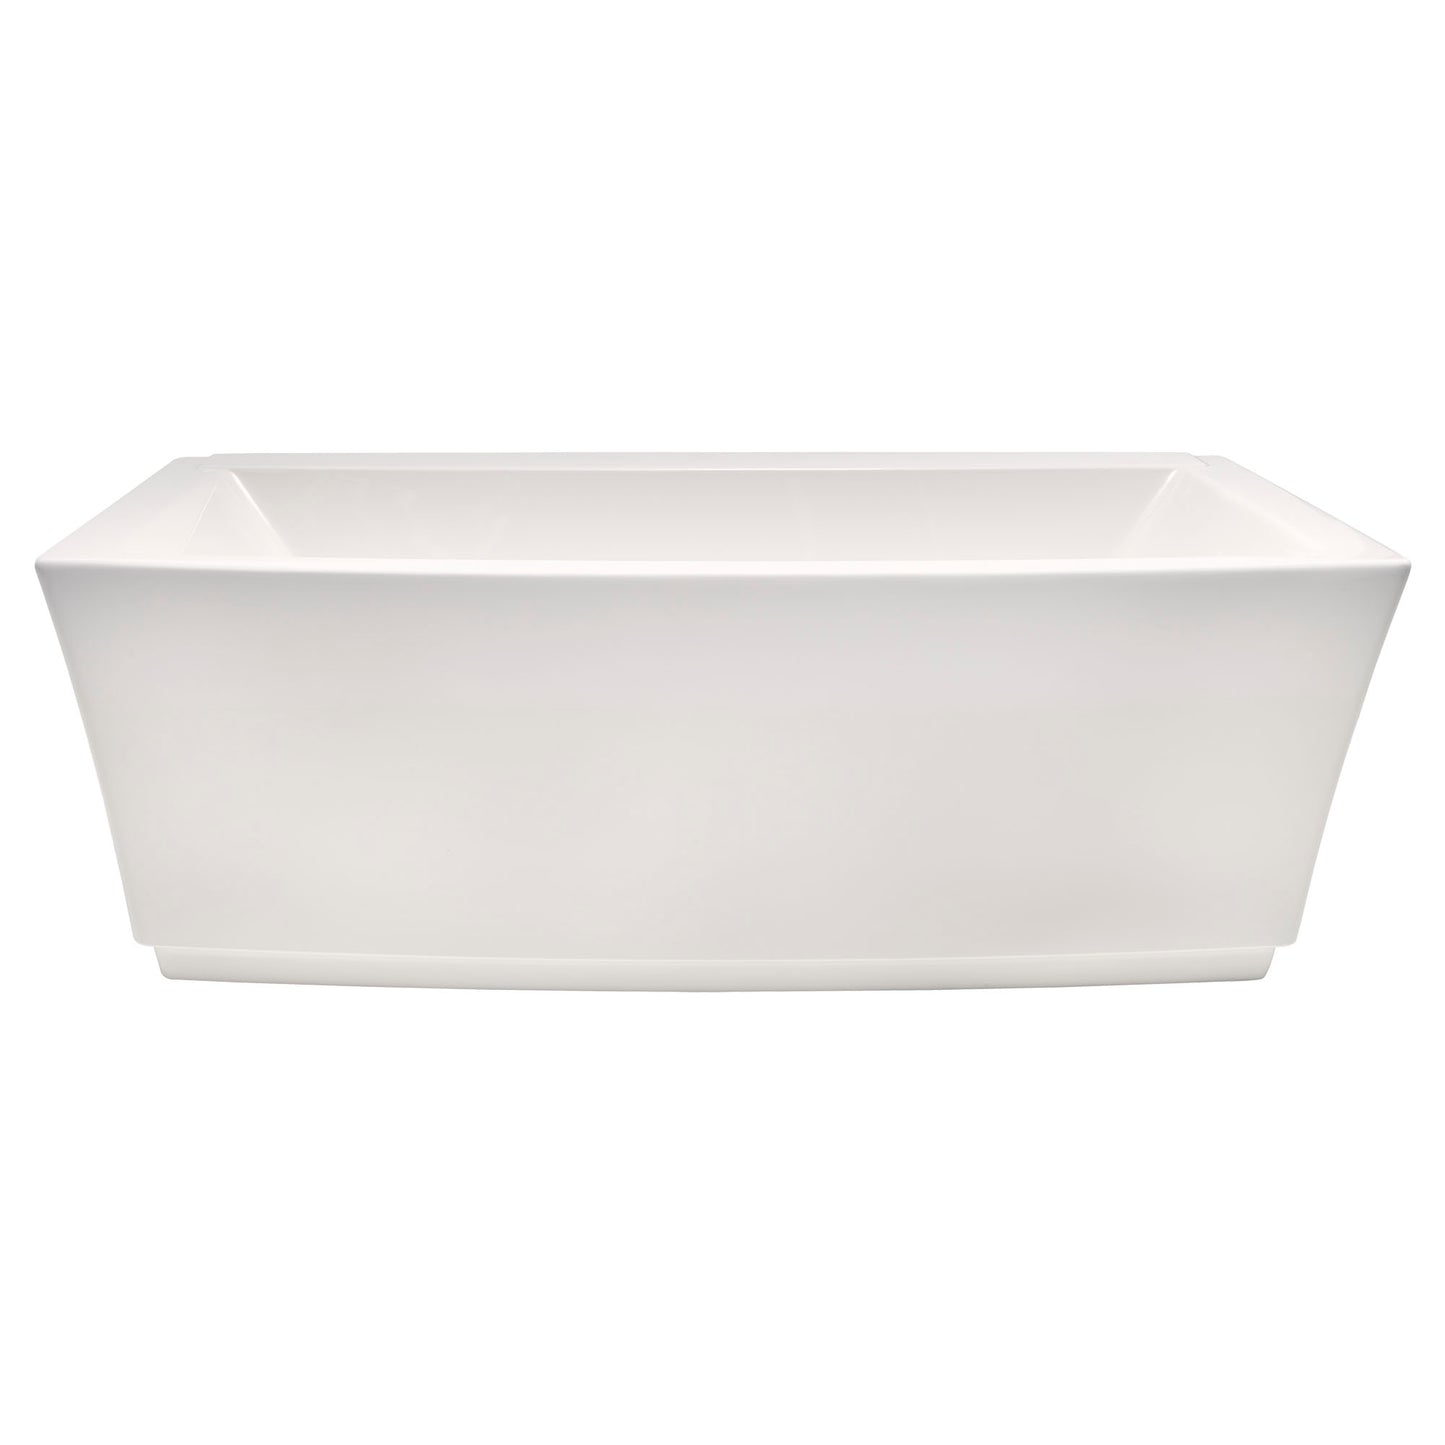 AMERICAN-STANDARD 2691004.020, Townsend 68 x 36-Inch Freestanding Bathtub Center Drain With Integrated Overflow in White